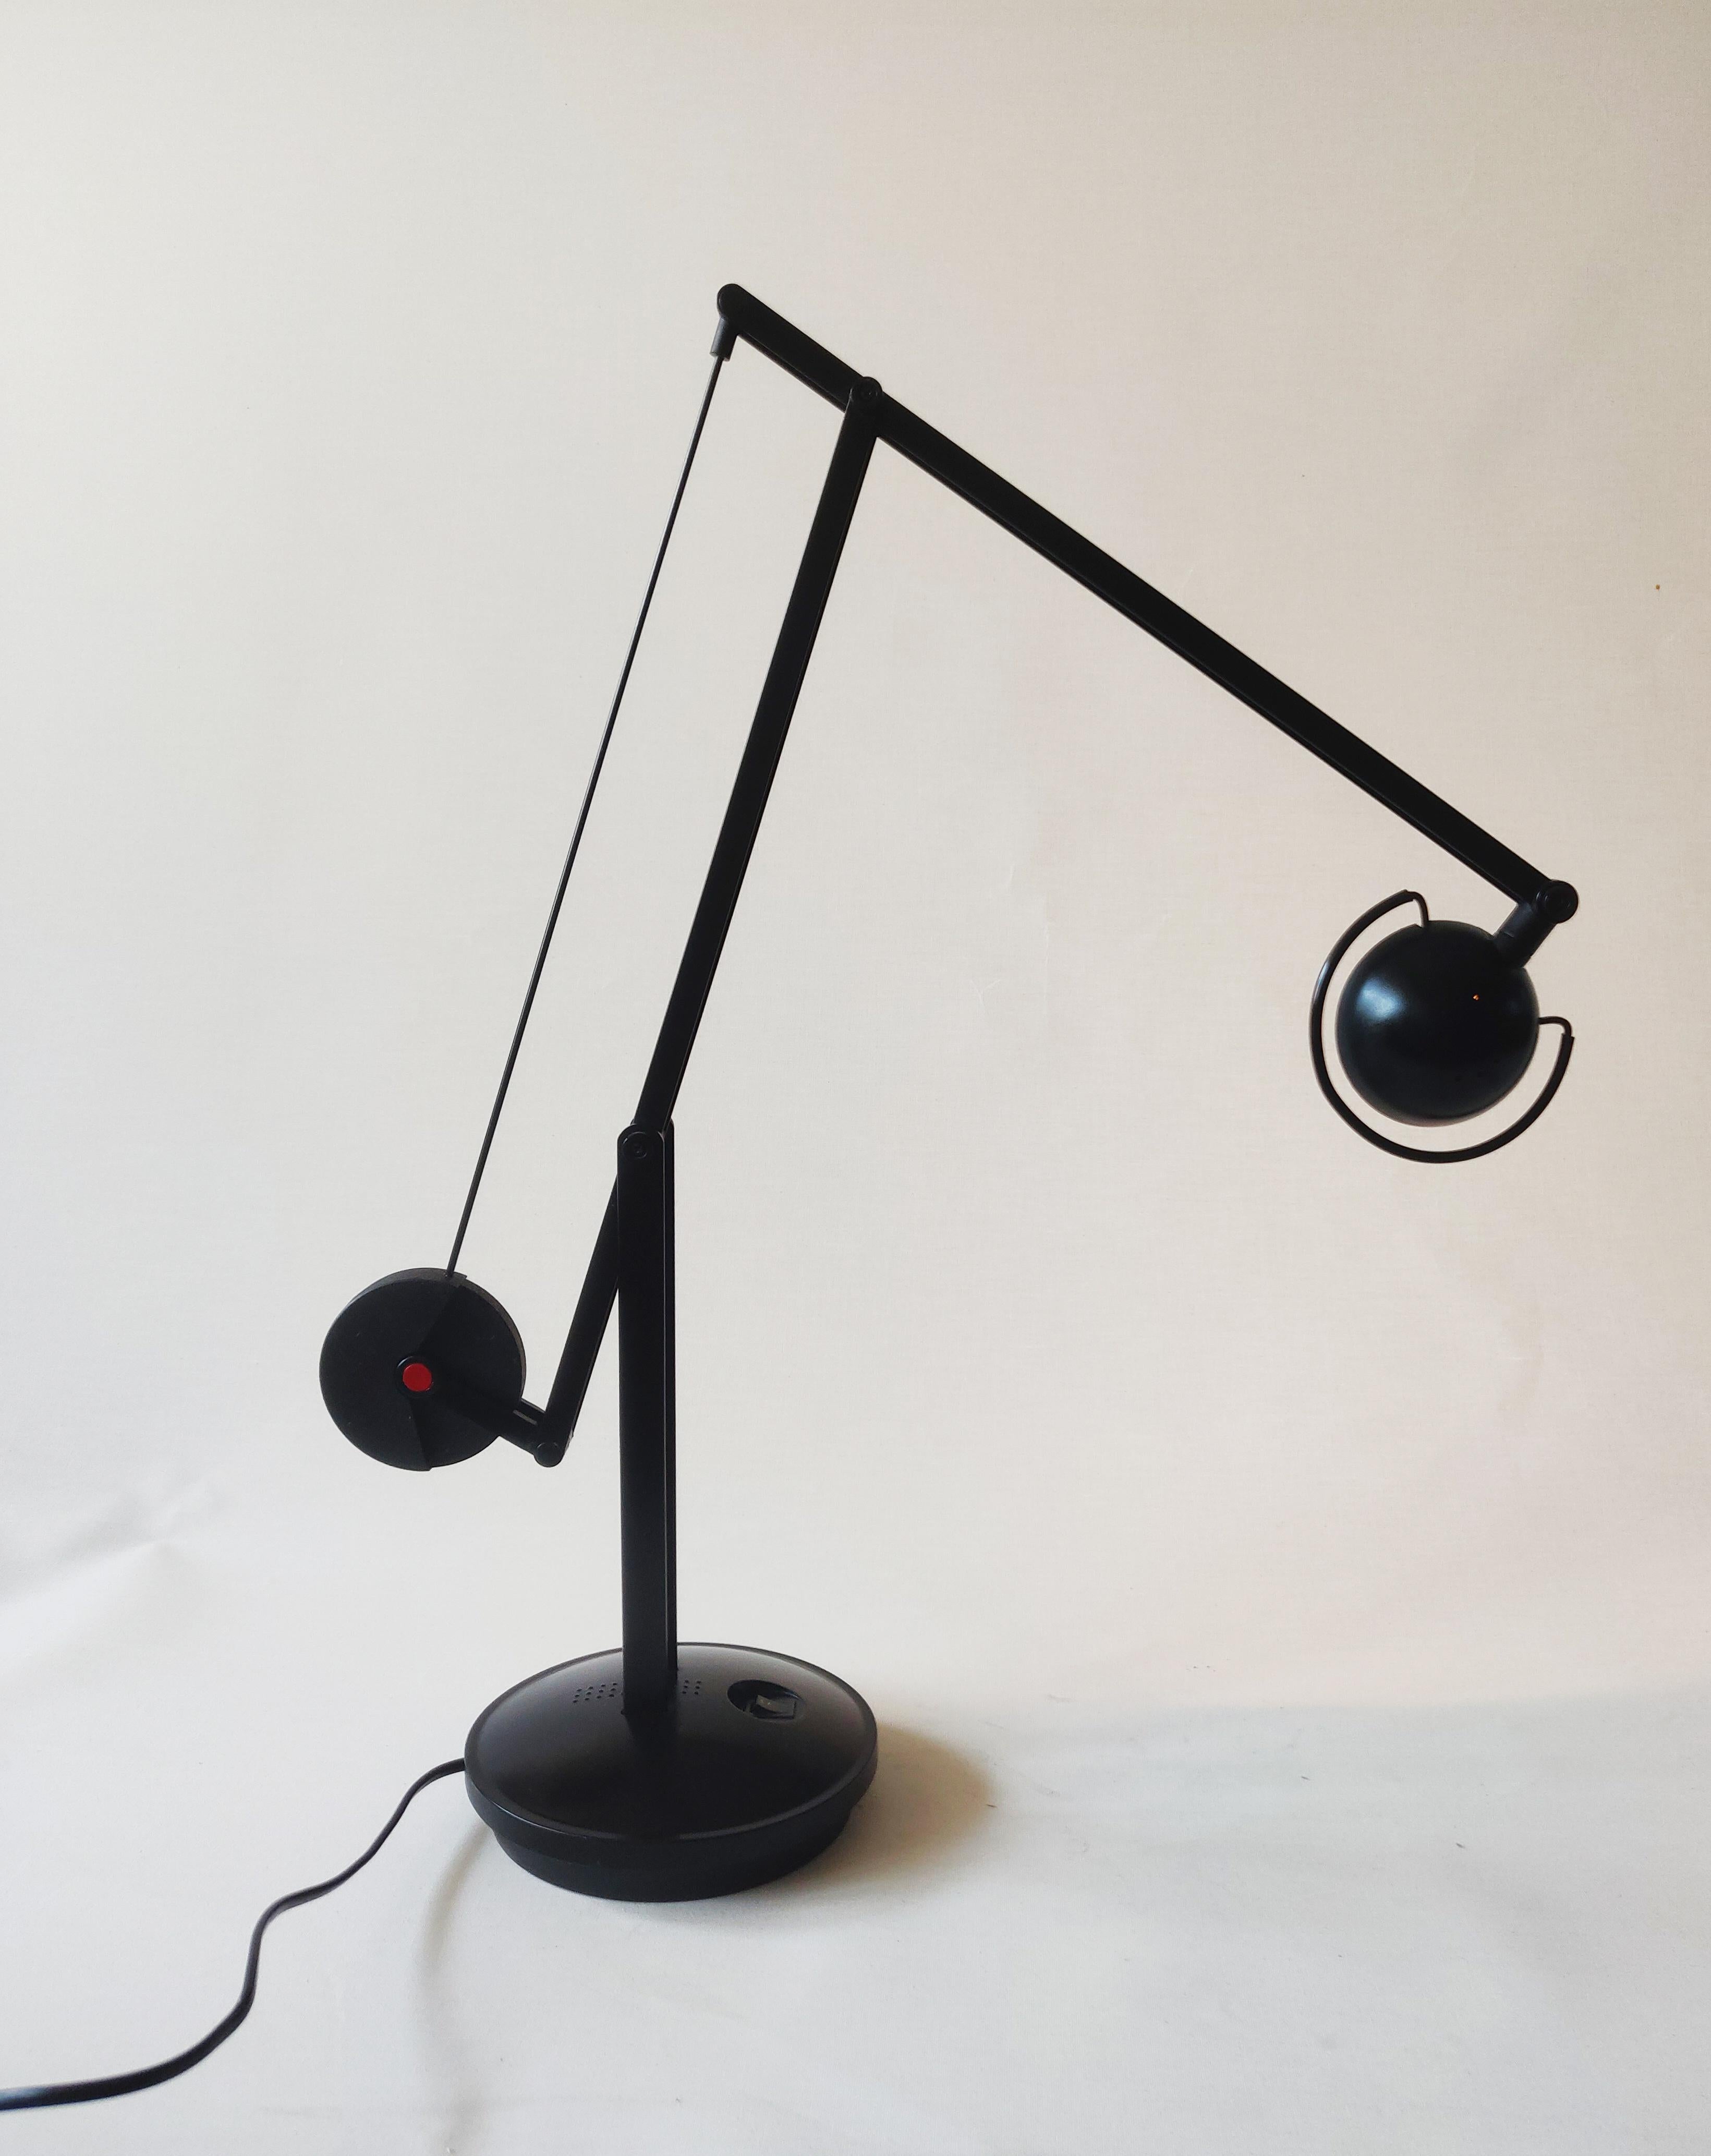 Black metal Architect desk lamp with counterweight and red details, reminiscent of the Memphis Group style.
The desk lamp can be placed in countless different positions. The heavy base has a diameter of 18 centimeter, the first arm(mounted on the